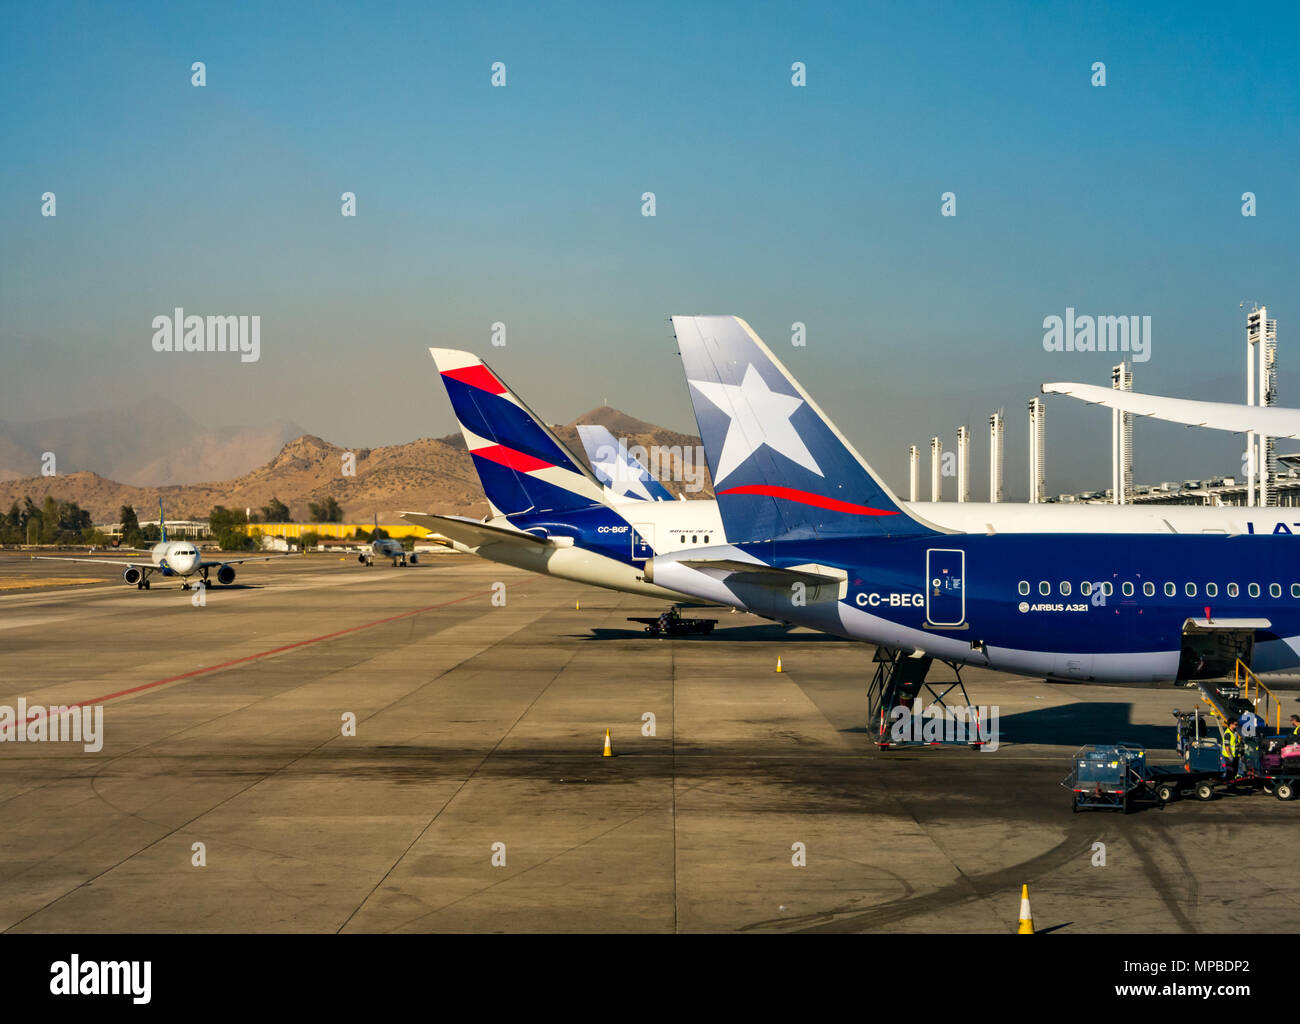 View from plane window, Santiago International airport of LATAM aeroplanes on apron, with new and old airline logos, joining LAN and TAM airlines Stock Photo